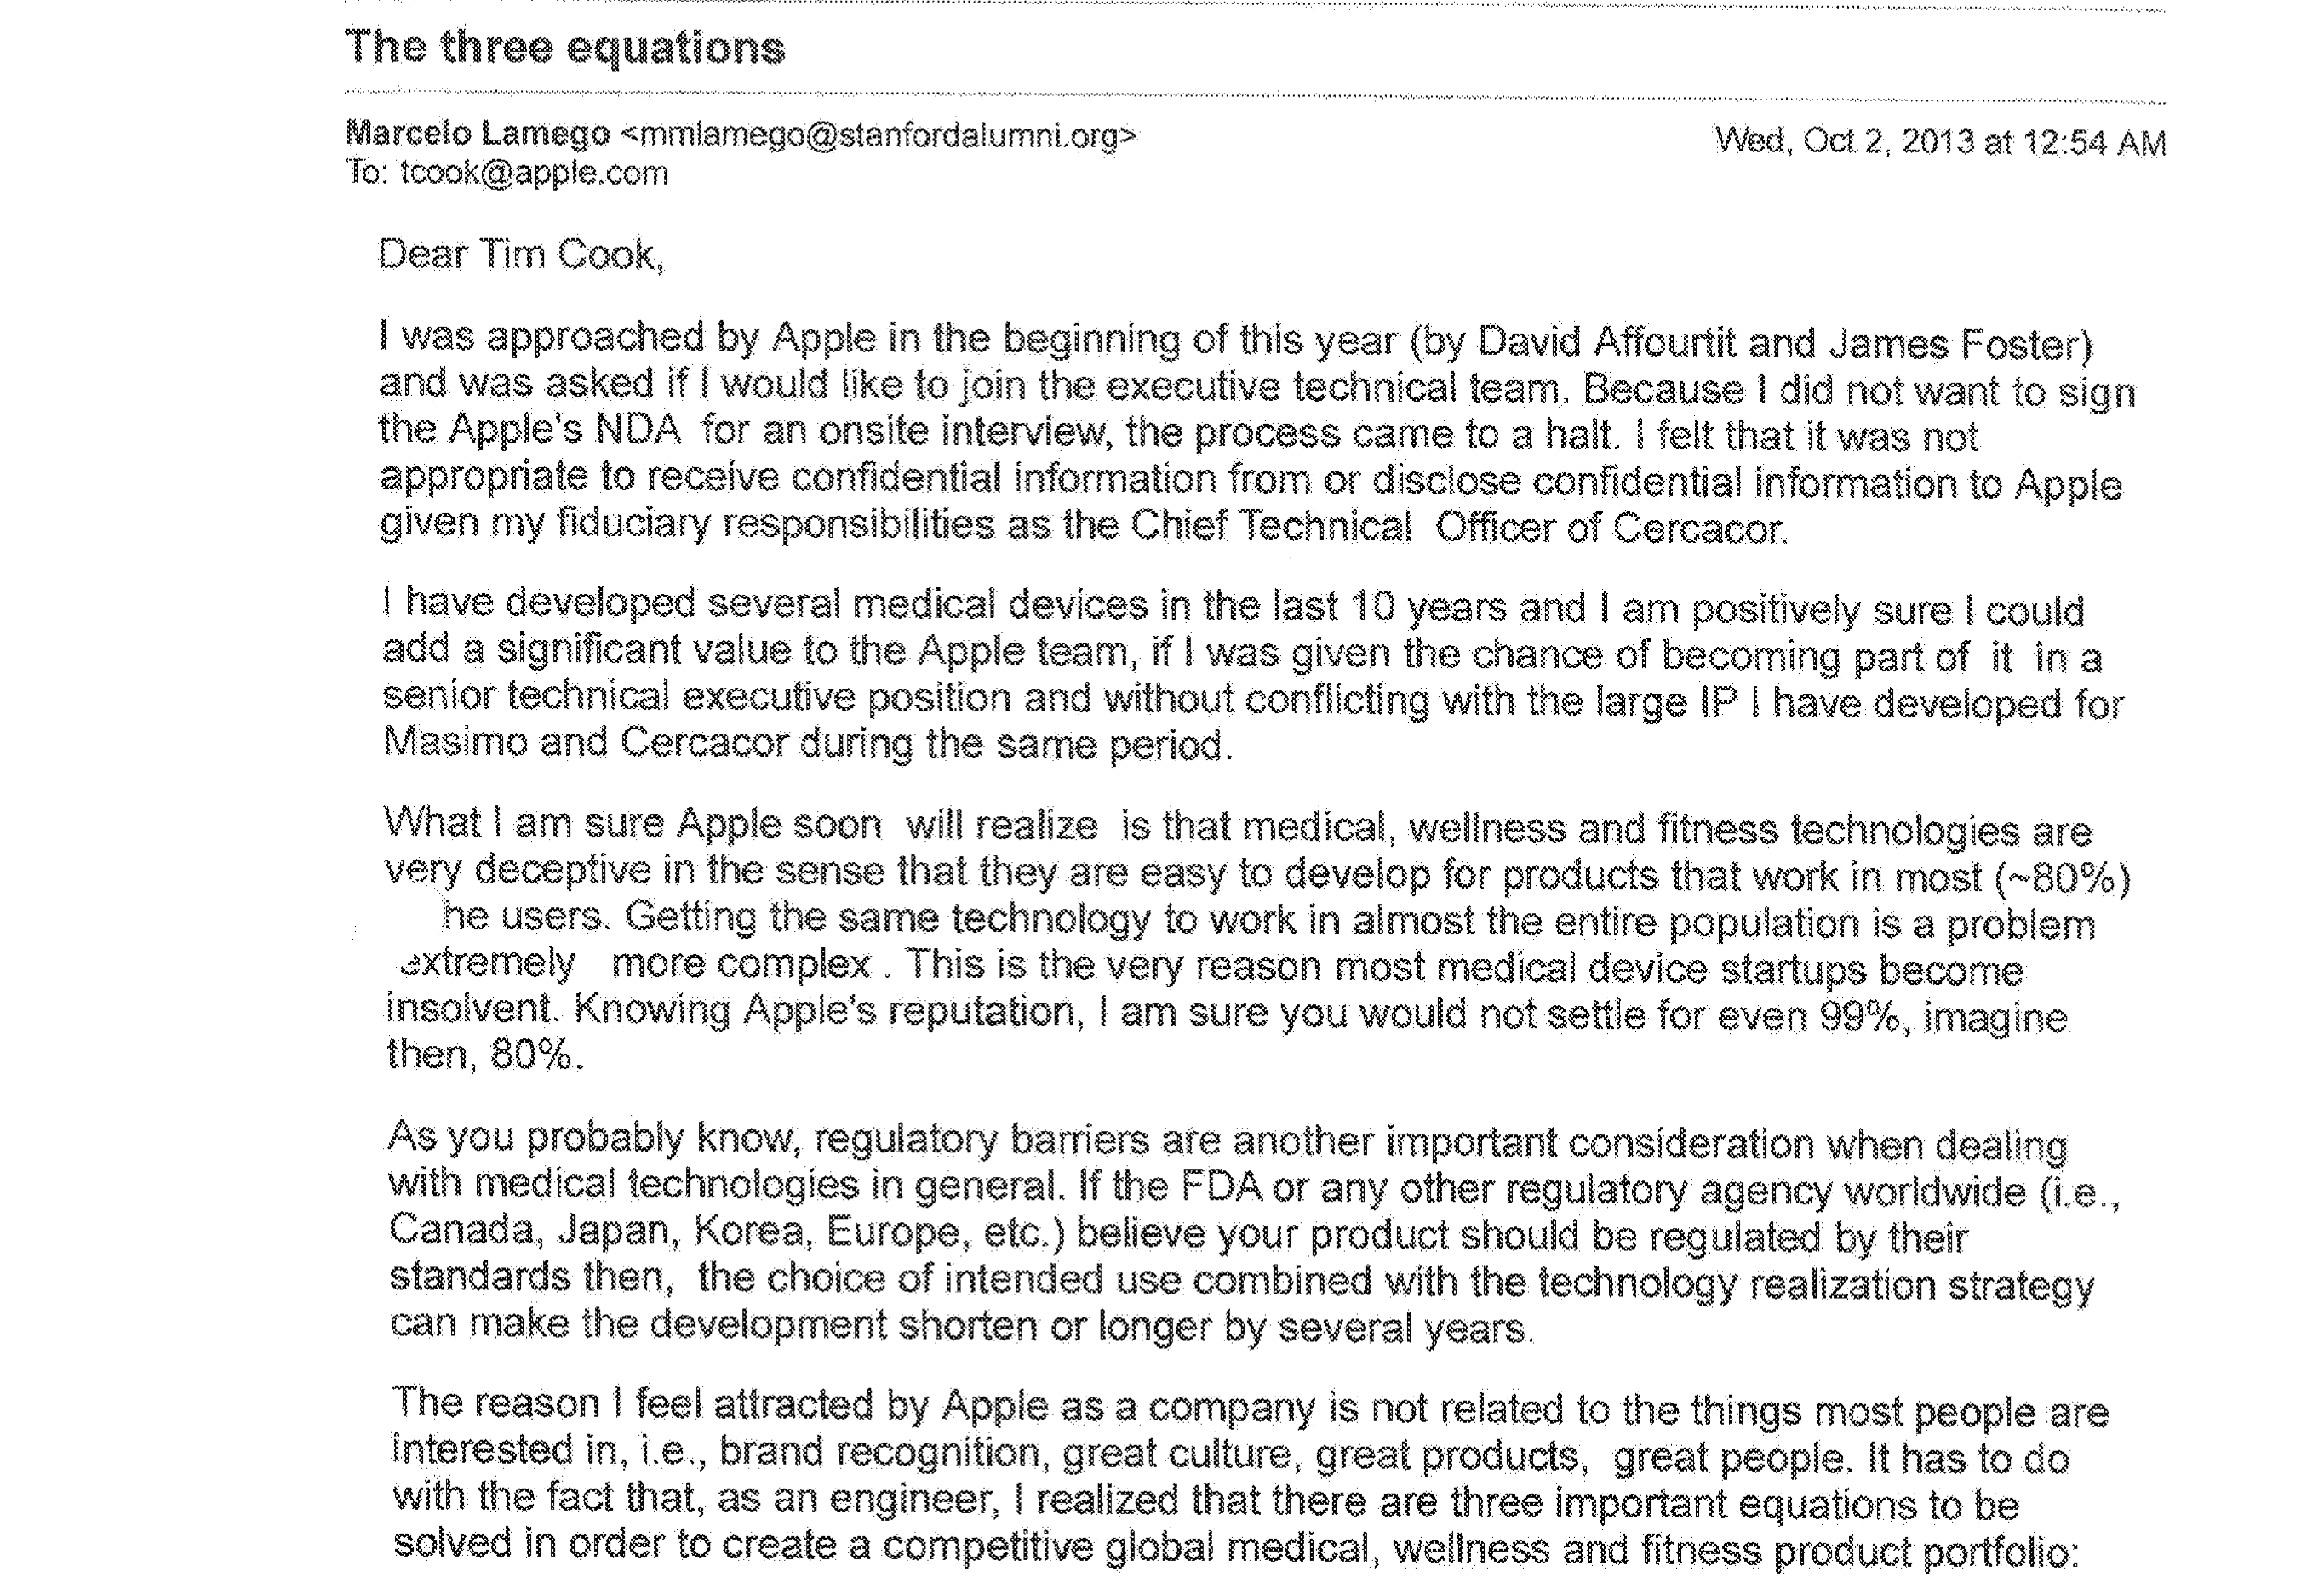 An email engineer Marcelo Lamego sent to Tim Cook.Source: Masimo lawsuit against Apple